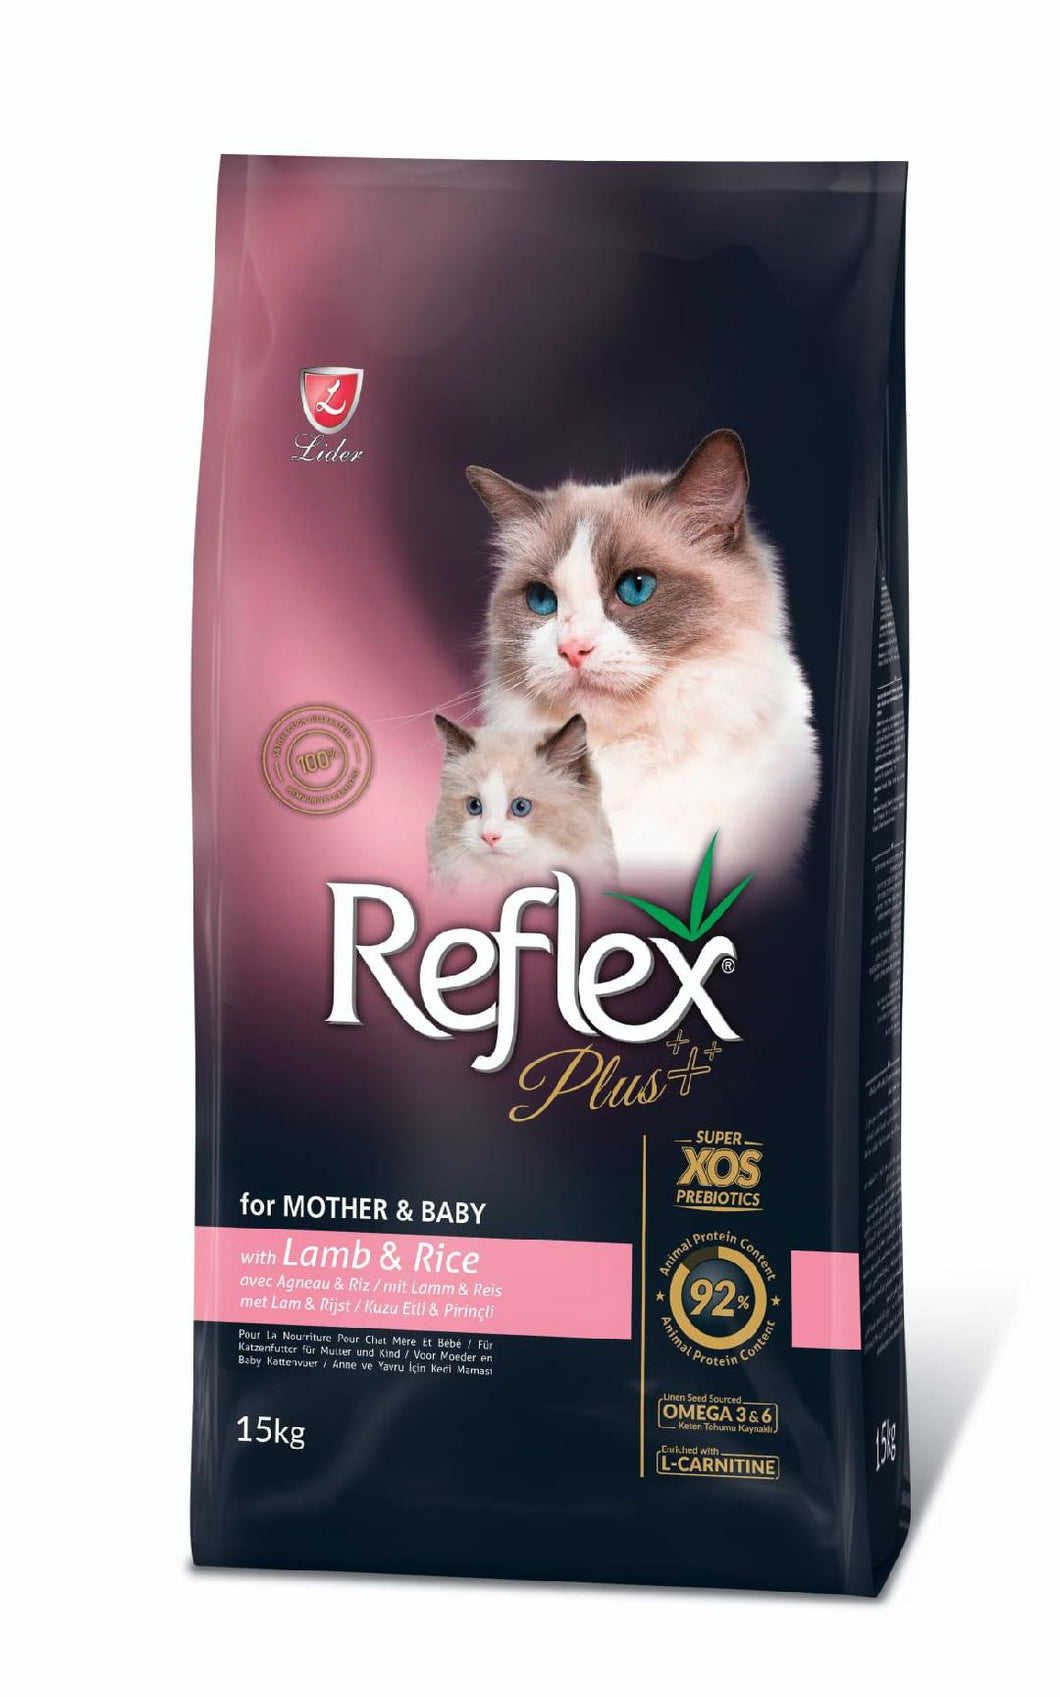 REFLEX PLUS MOTHER & BABY CATFOOD LAMB&RICE 15KG